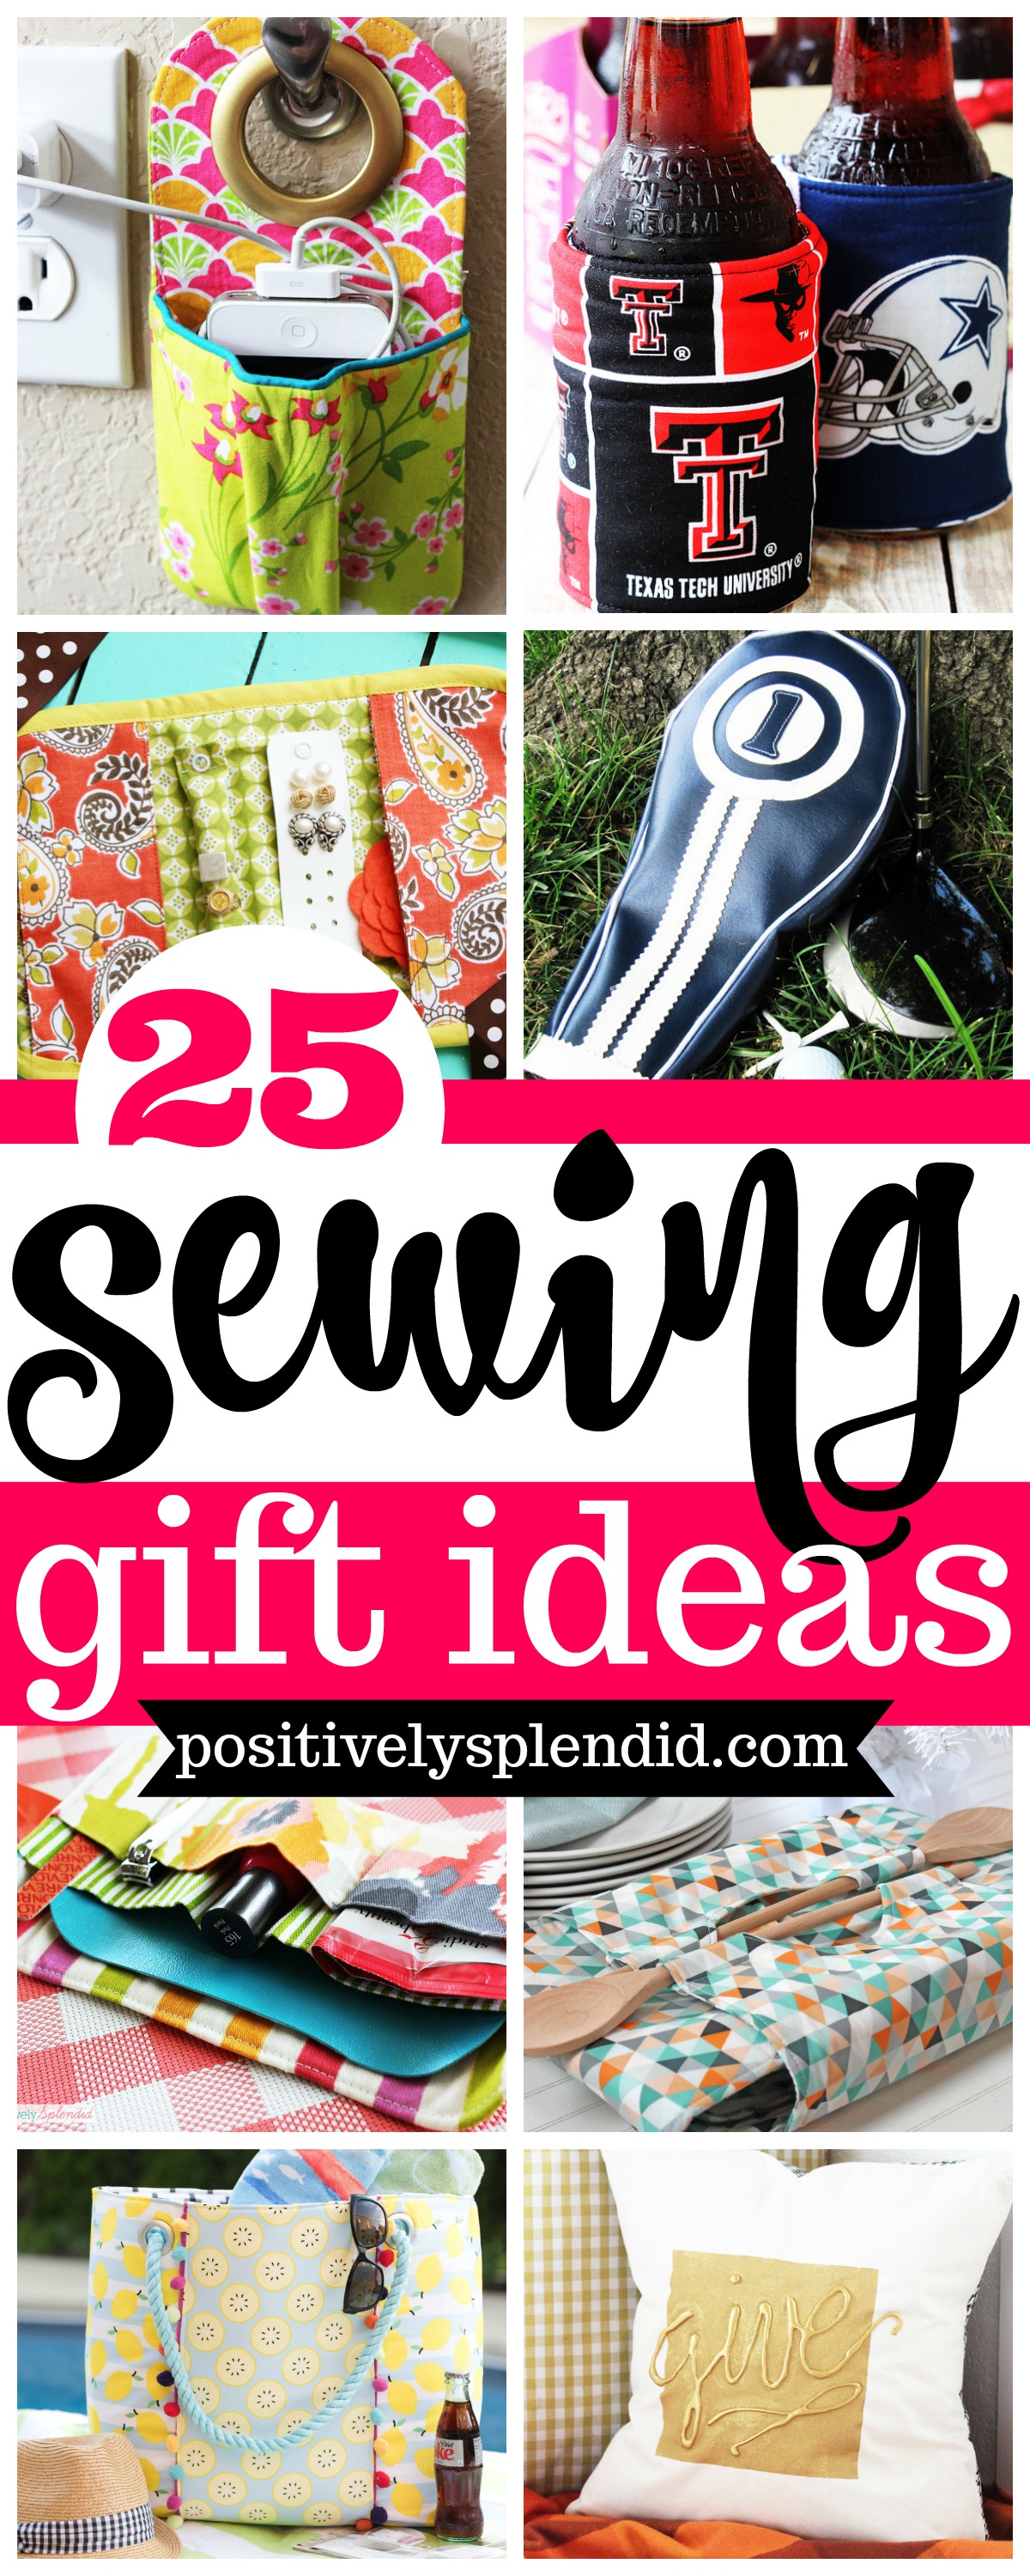 Easy Sew Christmas Gifts